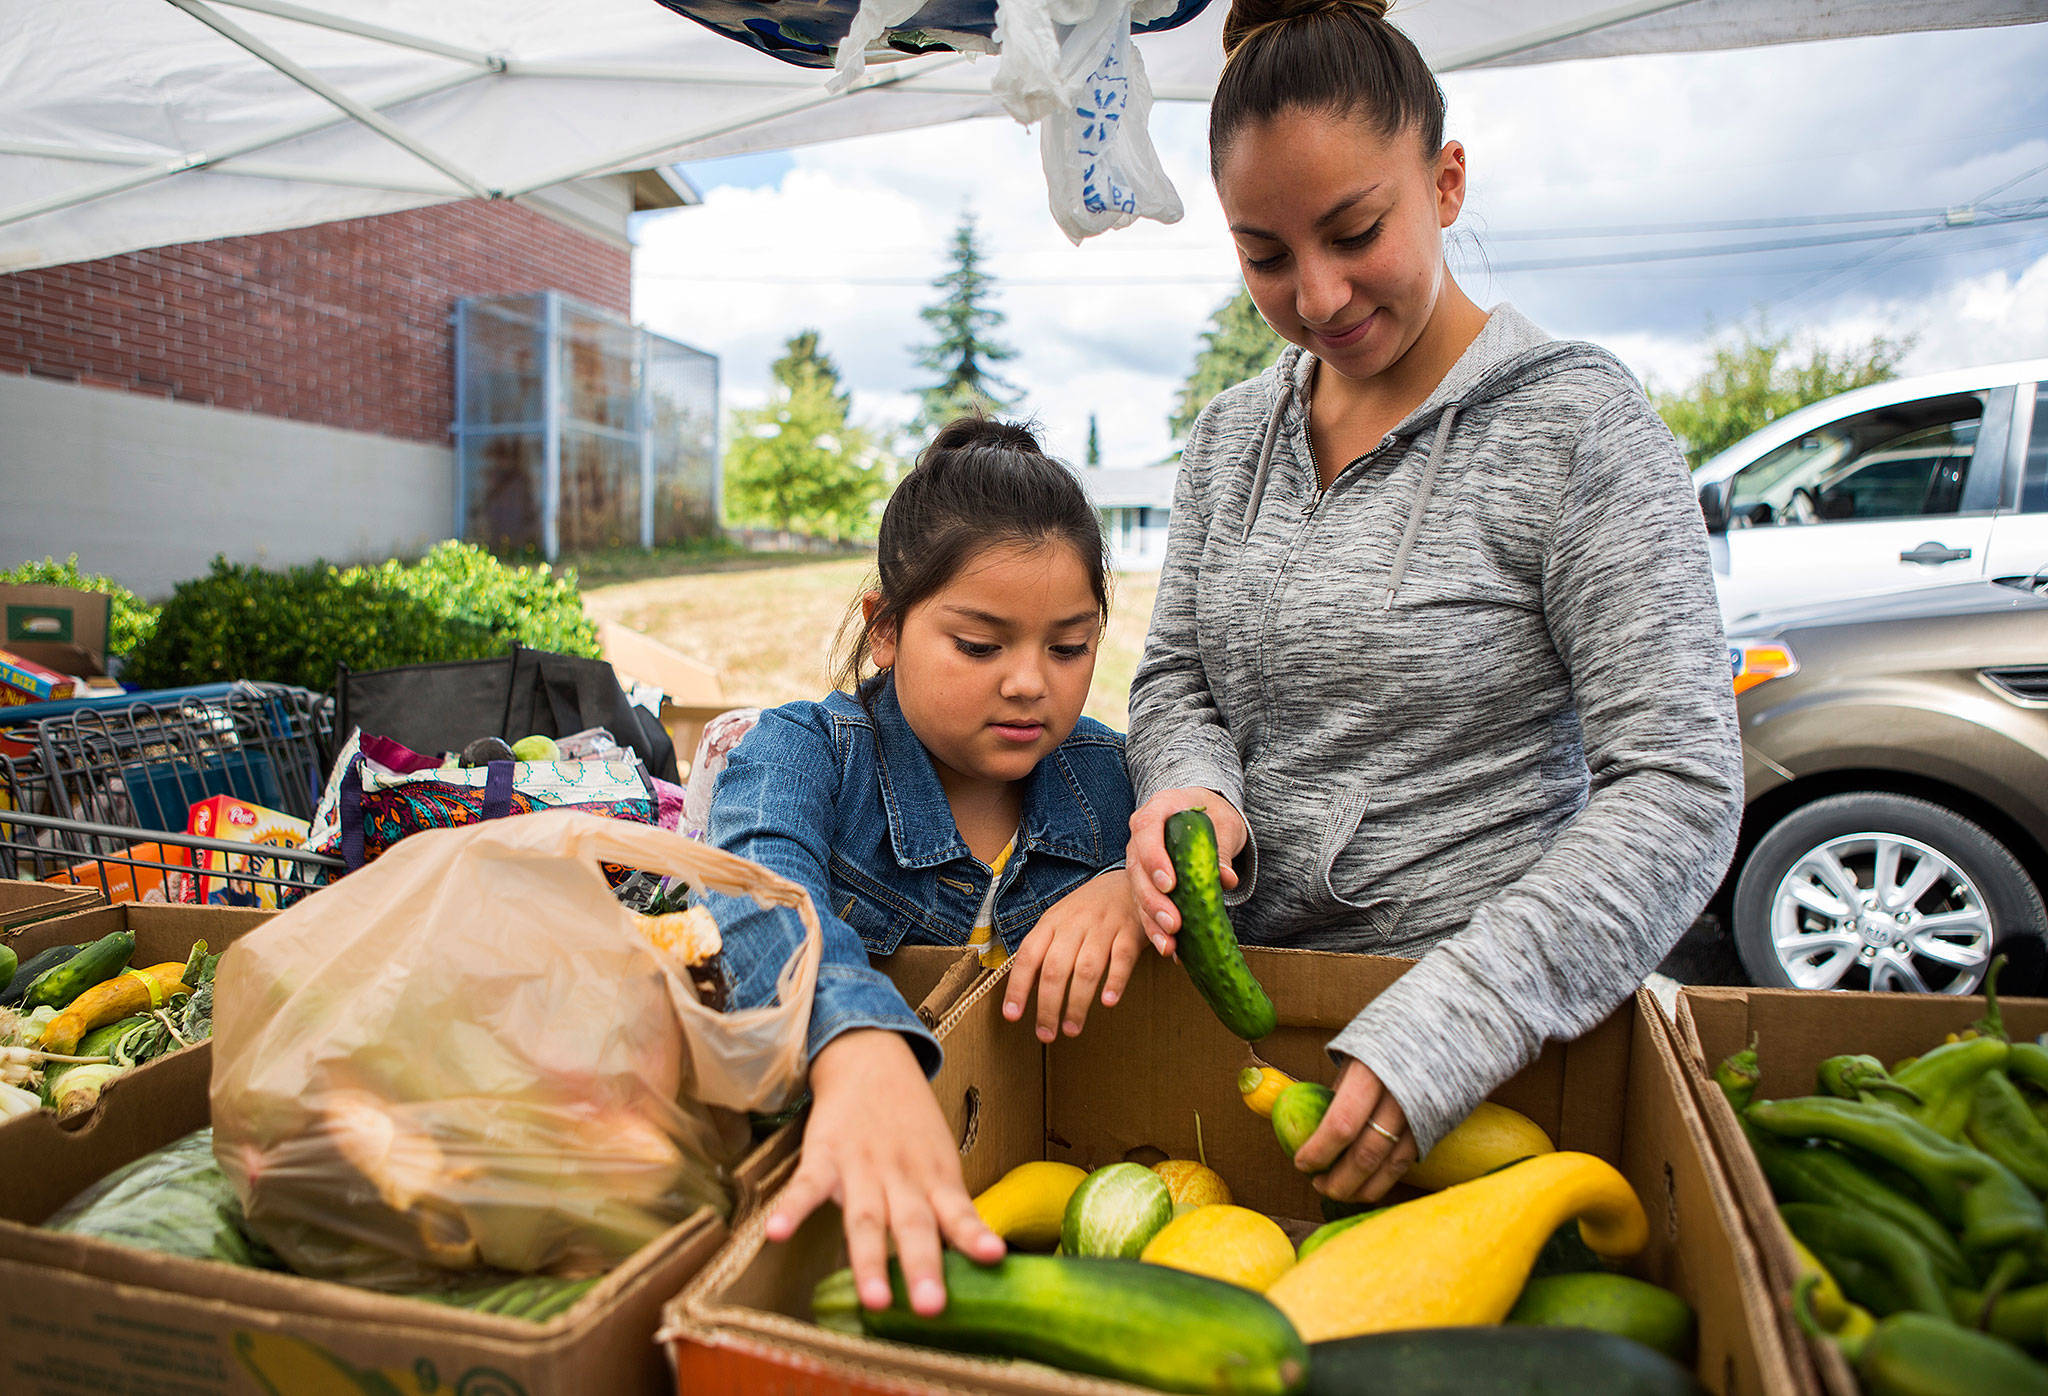 Anna Granados and daughter Alaisa Granadaos, 7, look through a box of vegetables at the Lake Stevens Community Food Bank in August in Lake Stevens. The partial government shutdown has increased use of food banks in Snohomish County and donations are needed to help meet that need. (Olivia Vanni / Herald file photo)